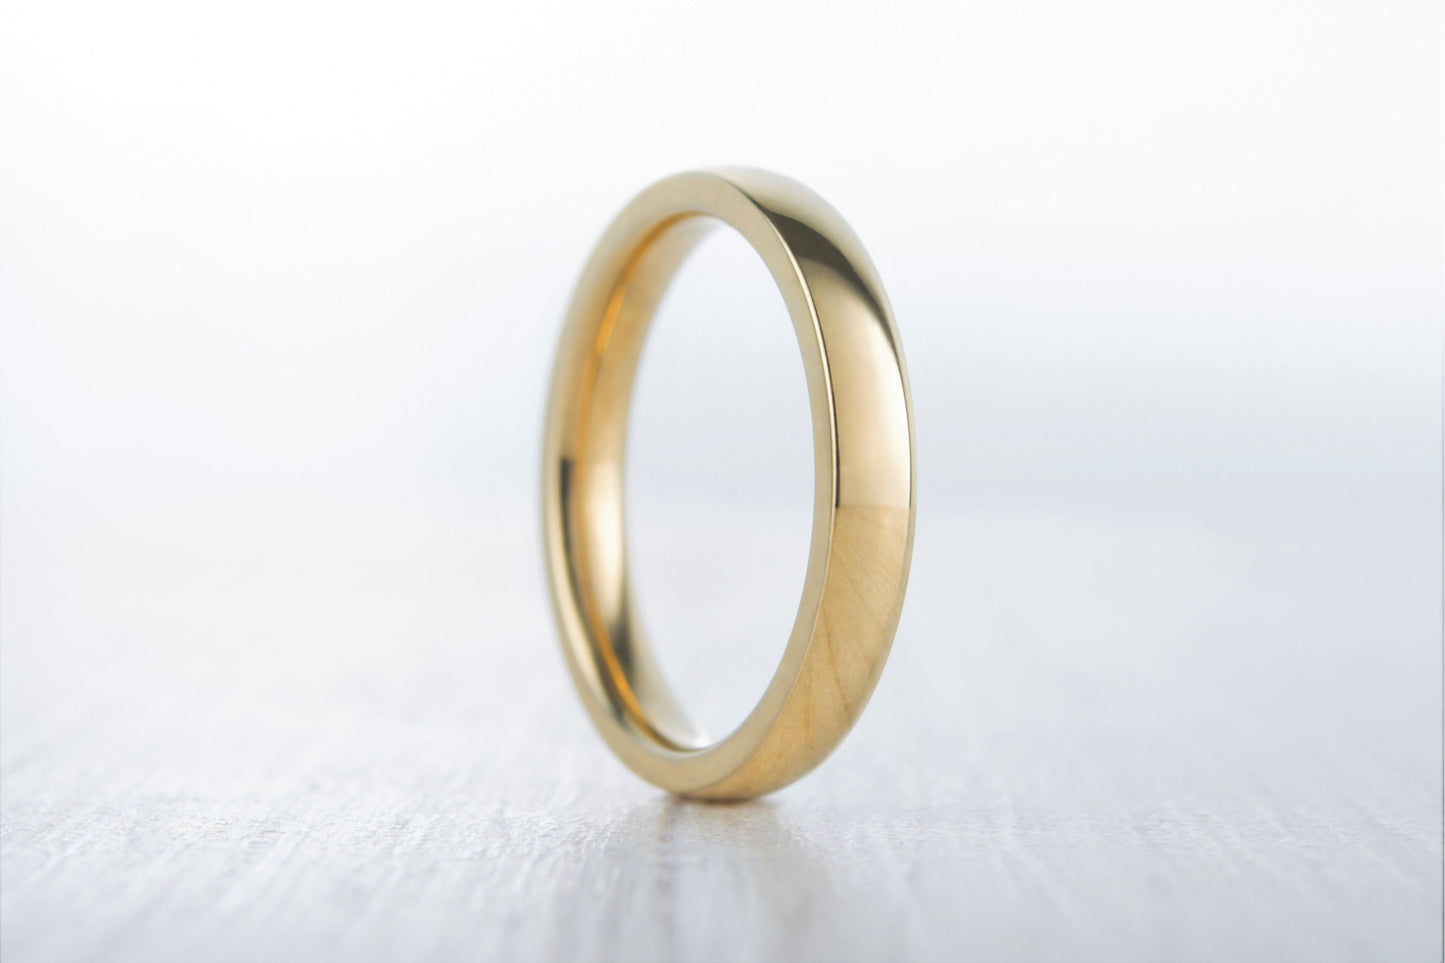 3mm Wide, filled 18ct Yellow gold Plain Wedding band Ring - gold ring